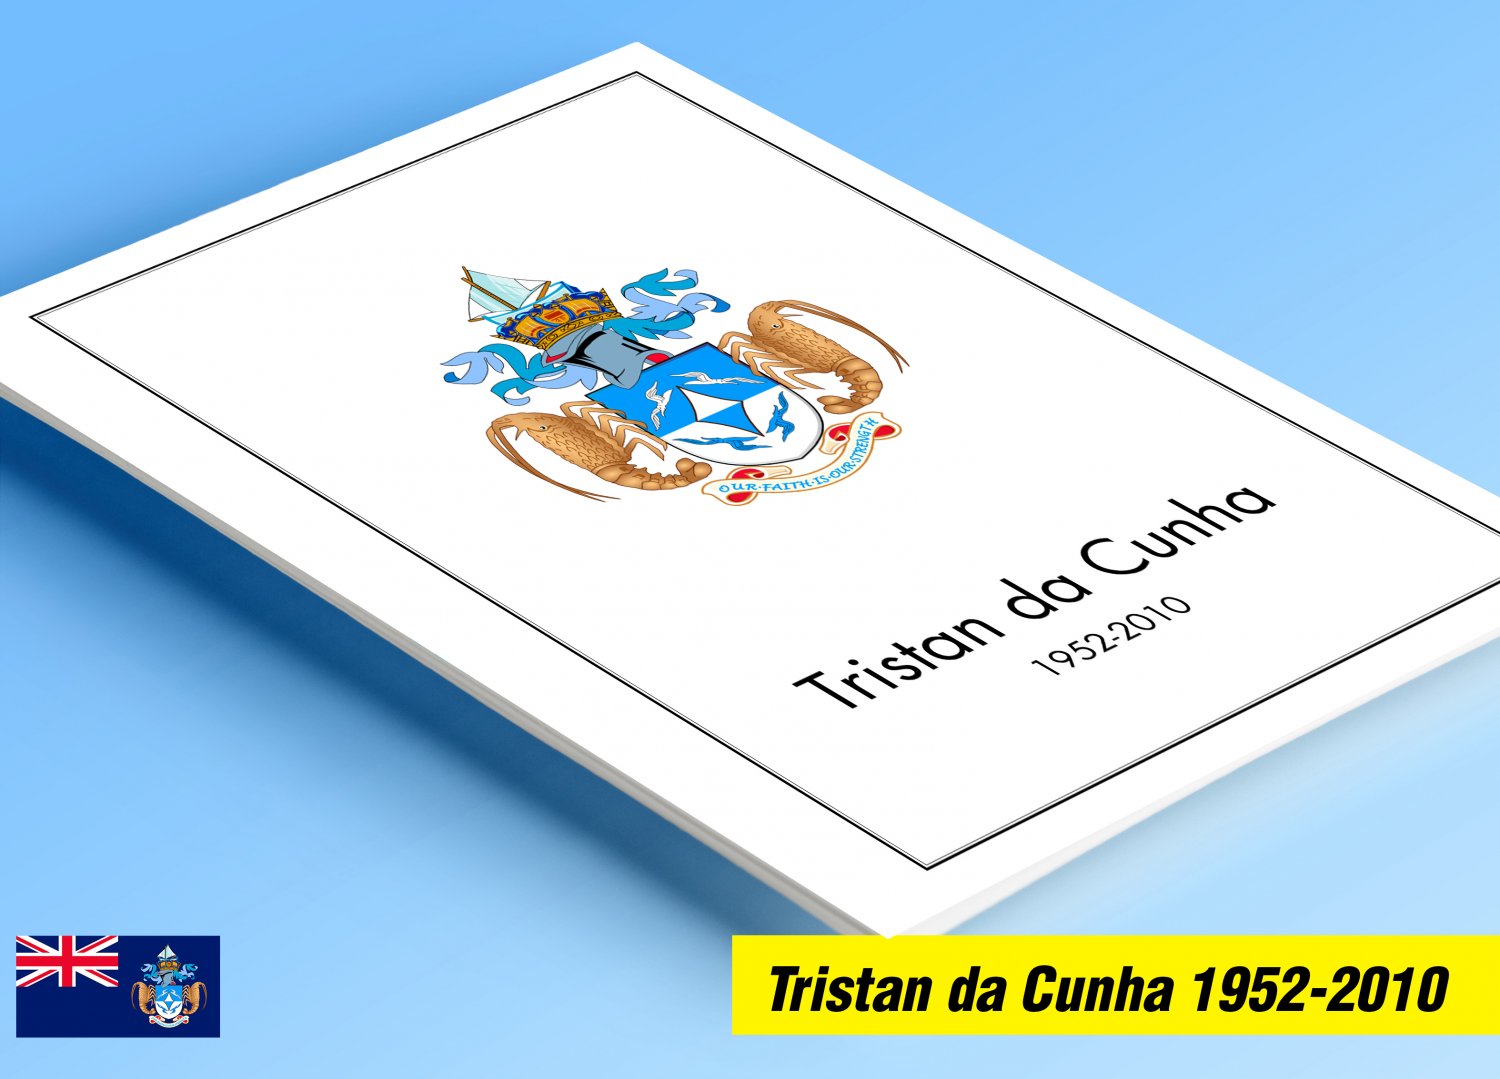 COLOR PRINTED TRISTAN DA CUNHA 1952-2010 STAMP ALBUM PAGES (139 illustrated pages)